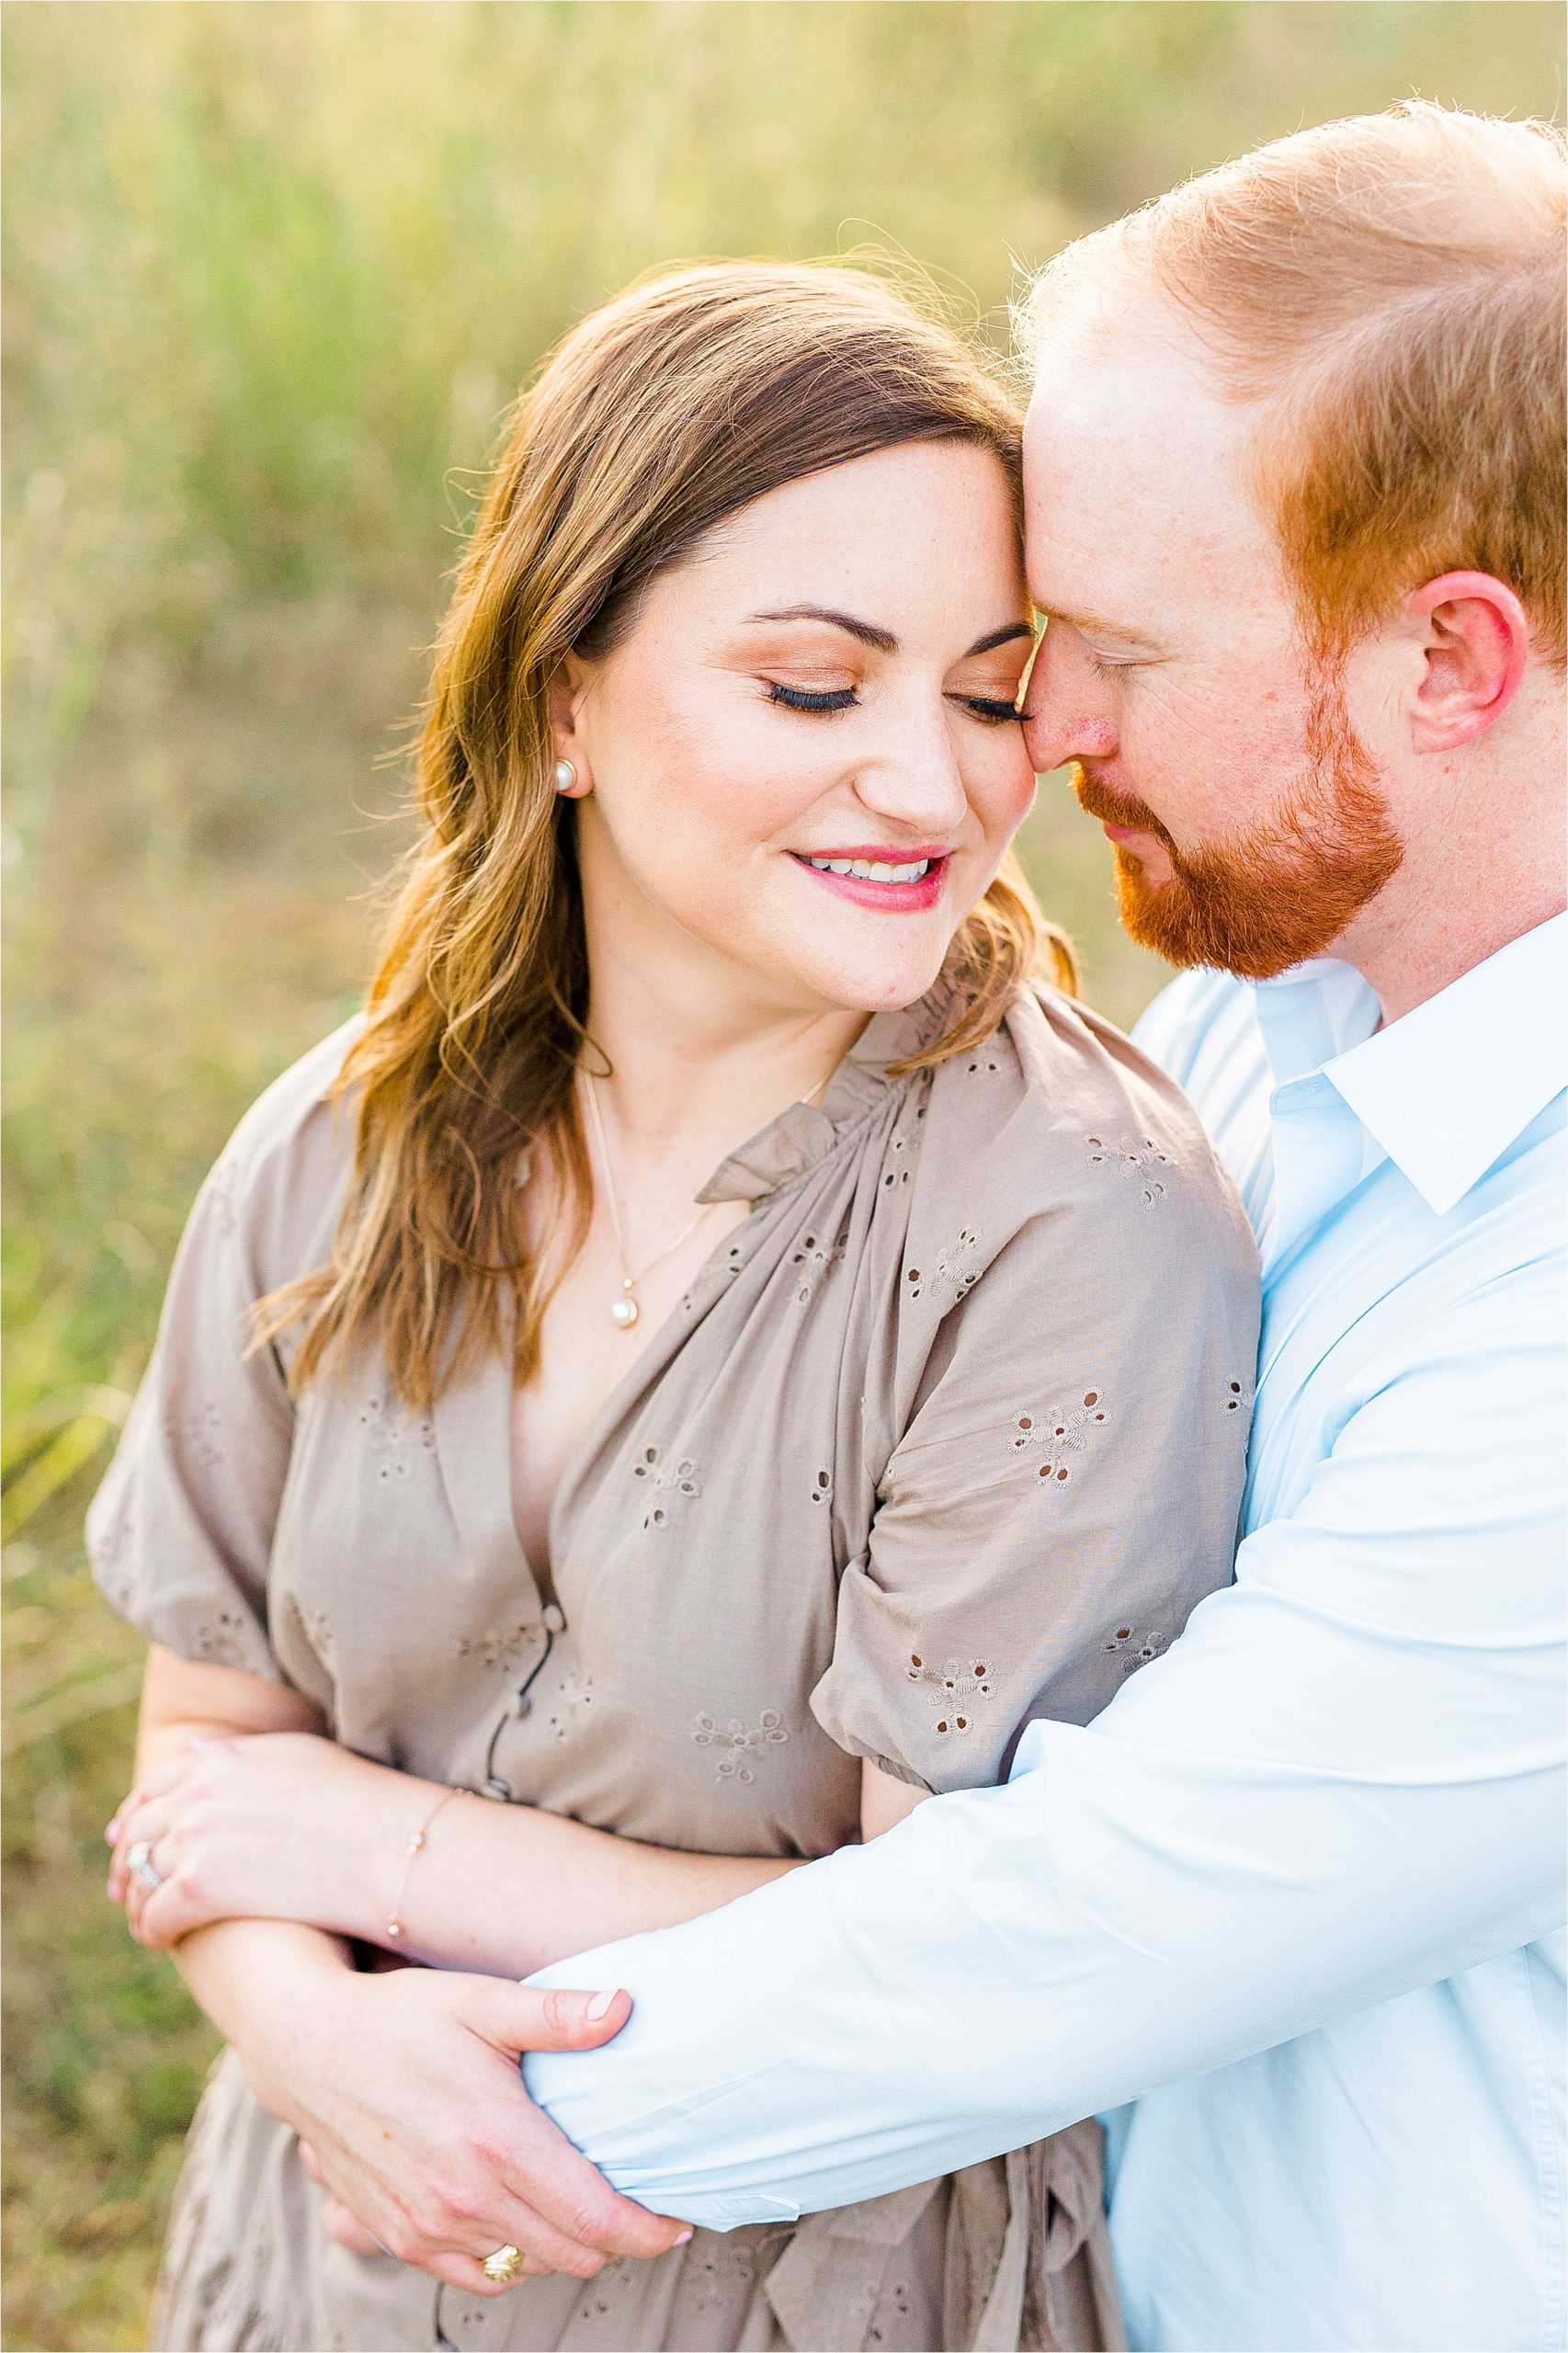 A bride to be snuggles into her fiance as he hugs her during their summer Hill country engagement session at Cibolo Creek Nature Center in Boerne, Texas